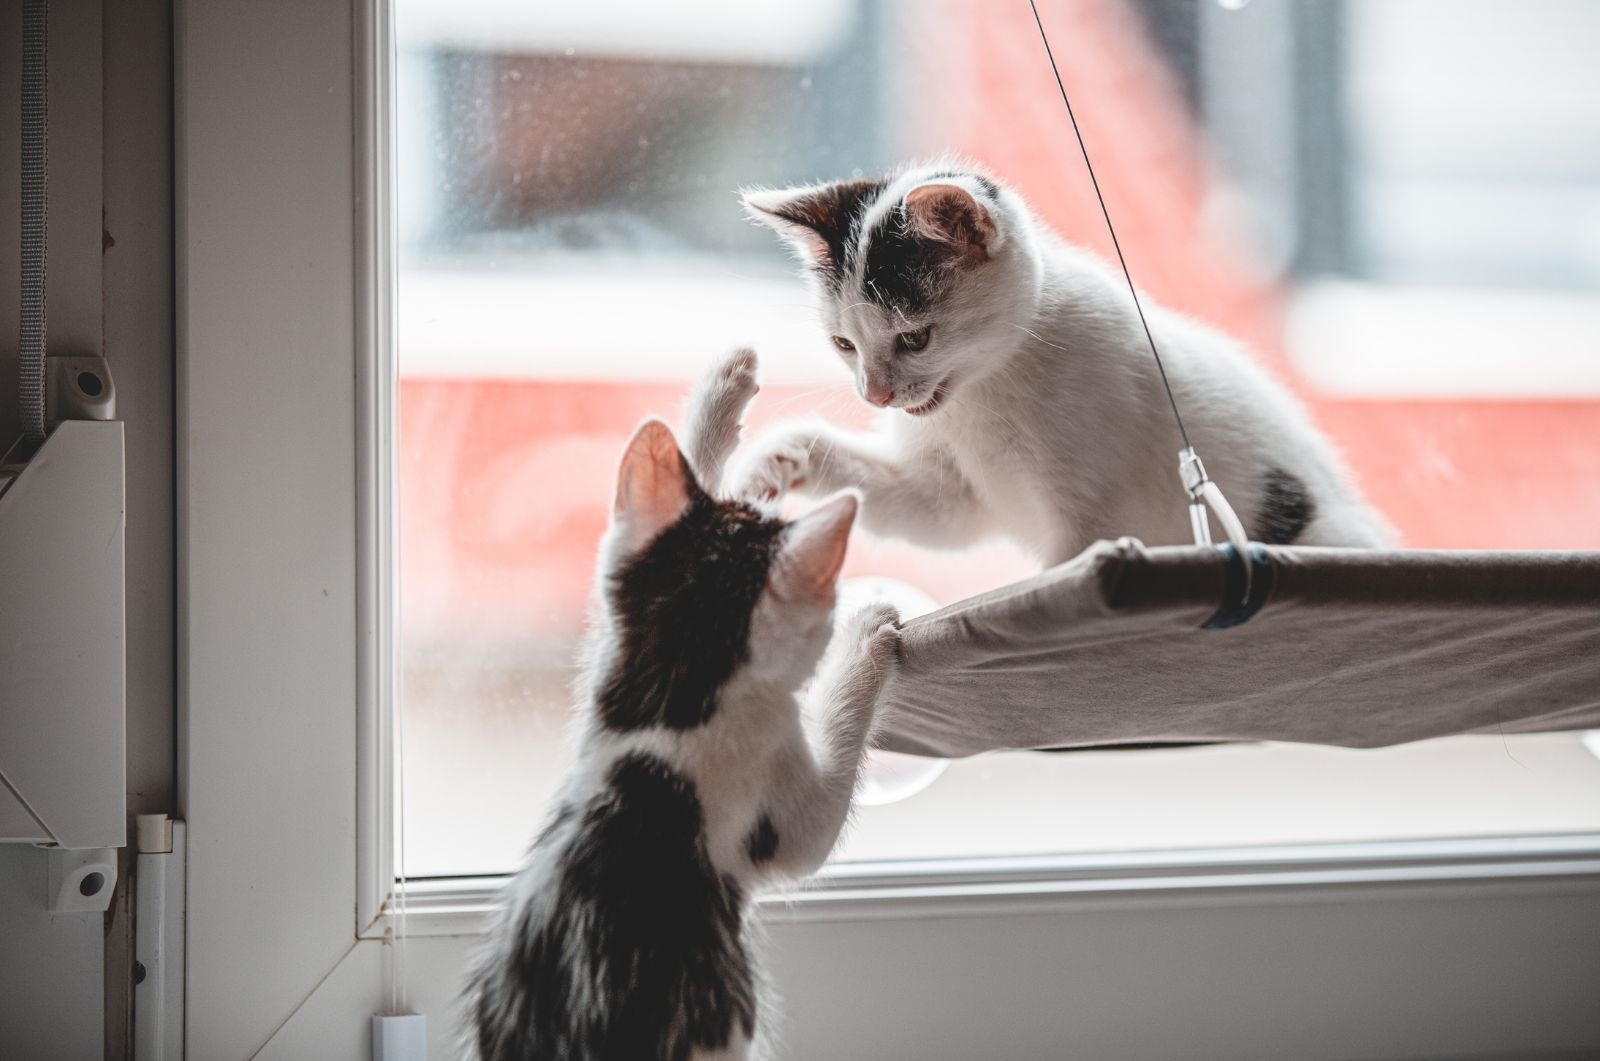 Pet playing safely away from window cords image